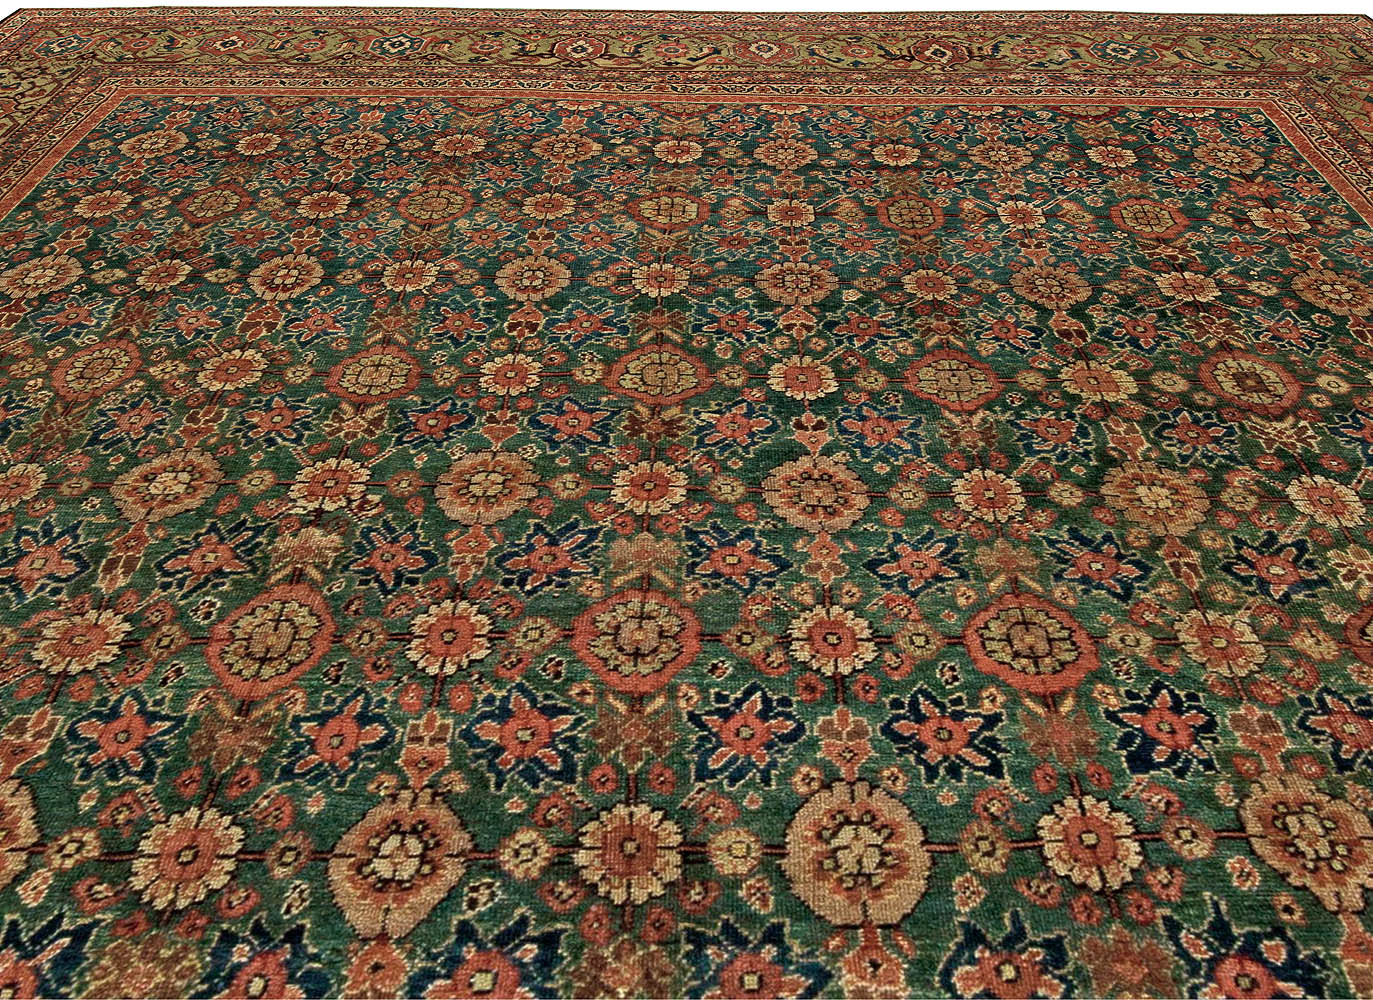 1920s Persian Sultanabad Red, Brown and Beige Handwoven Wool Rug BB5830